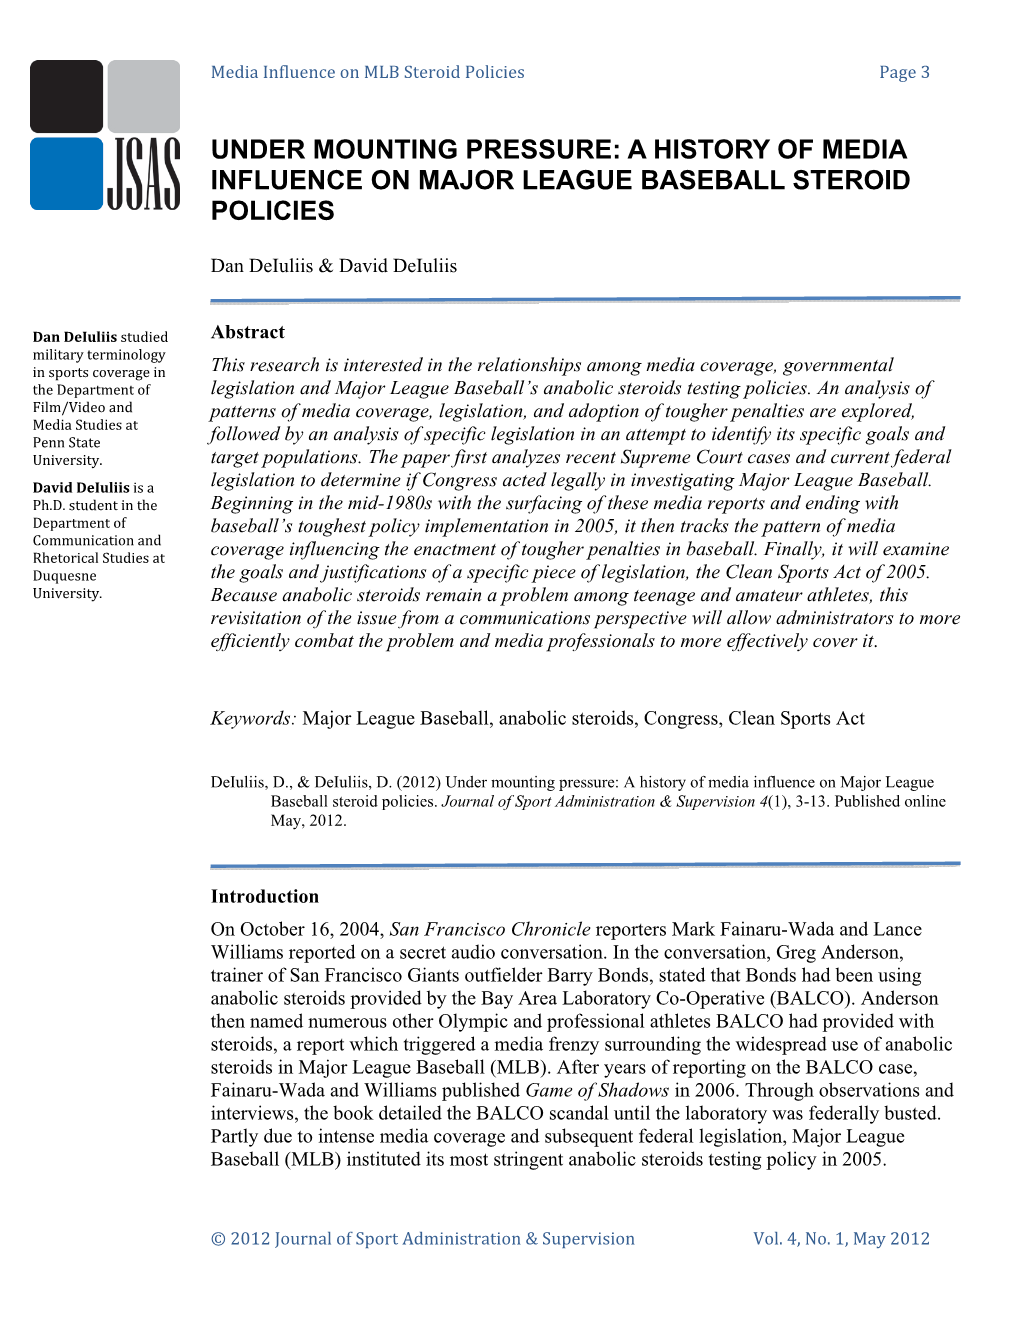 Under Mounting Pressure: a History of Media Influence on Major League Baseball Steroid Policies